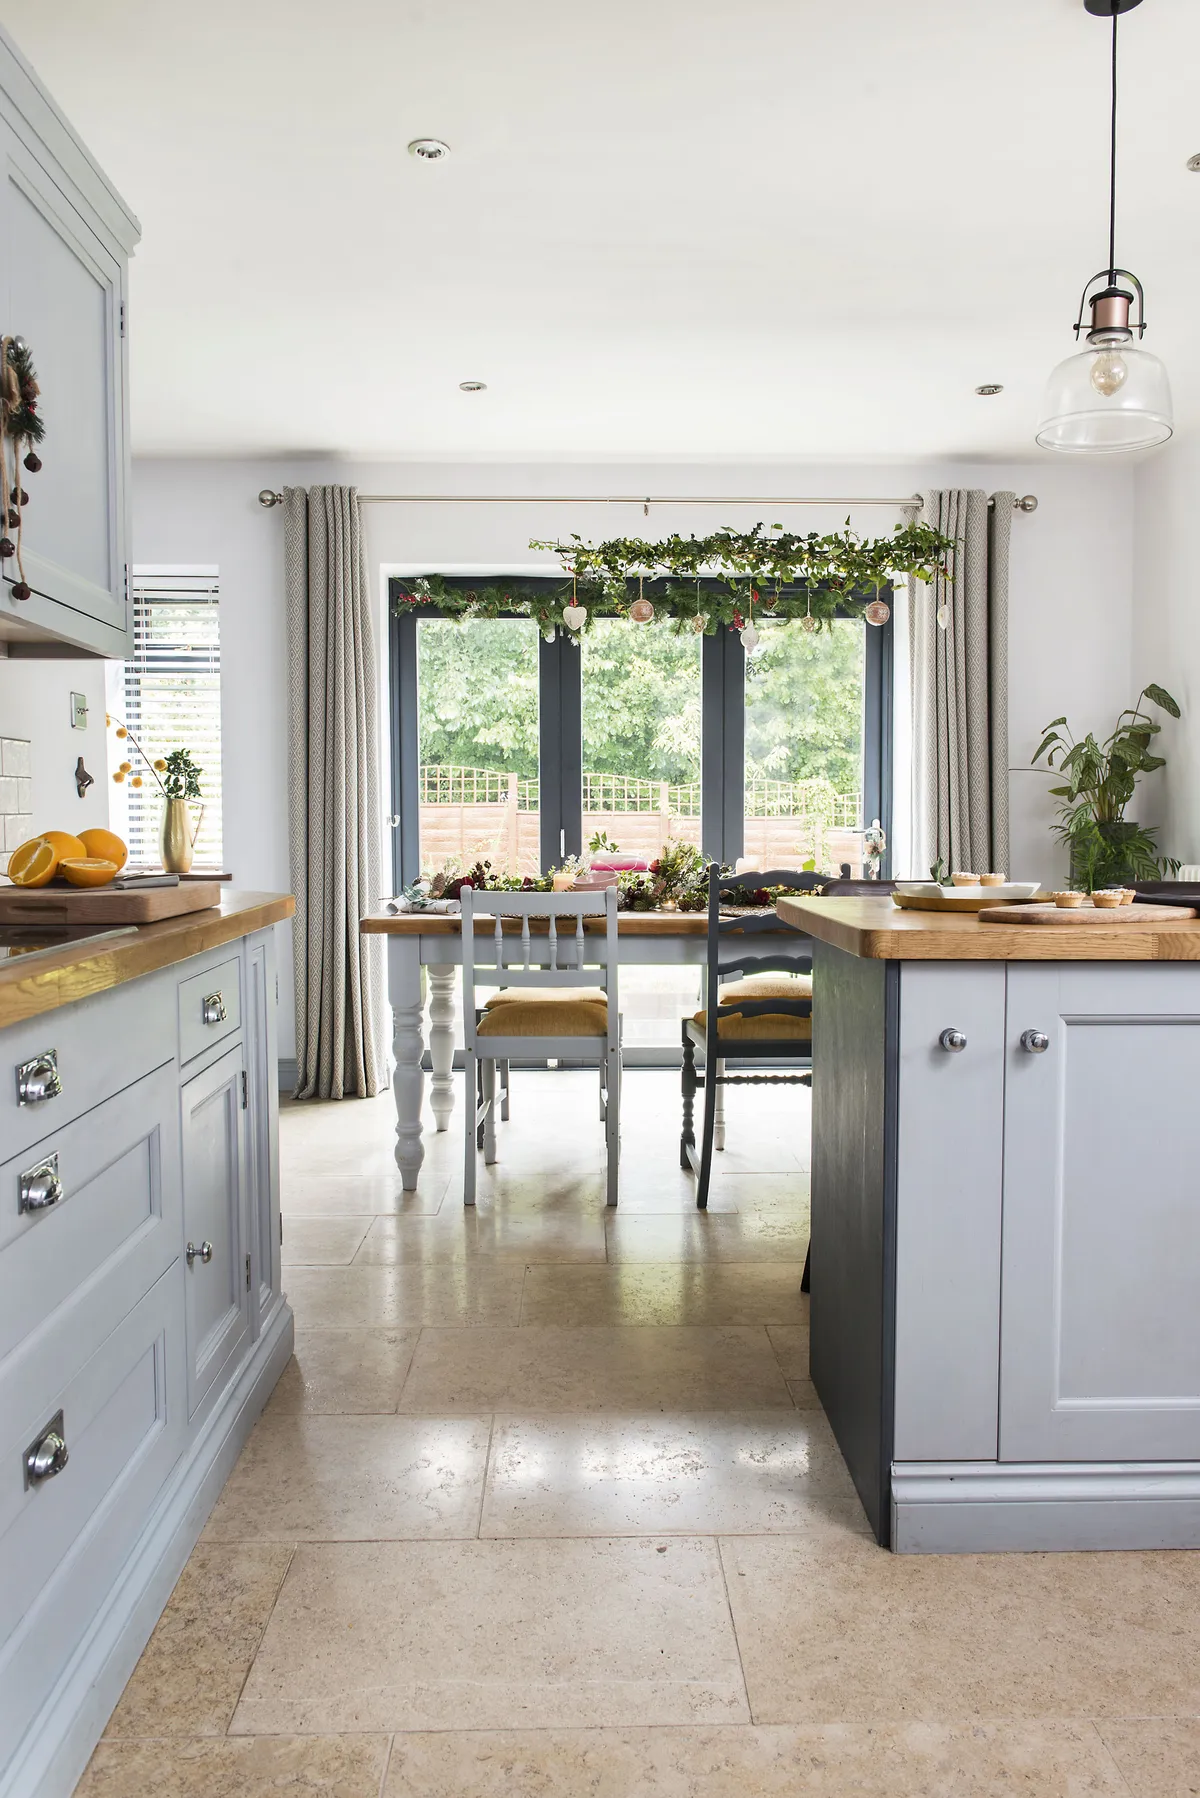 Although the kitchen is second-hand, it’s a handmade, bespoke wooden Shaker-style design that the couple painted in Denali by GoodHome at B&Q. ‘We did have to buy a few extra units and door fronts’ says Amy. ‘My dad built us a lovely pantry cupboard as well’